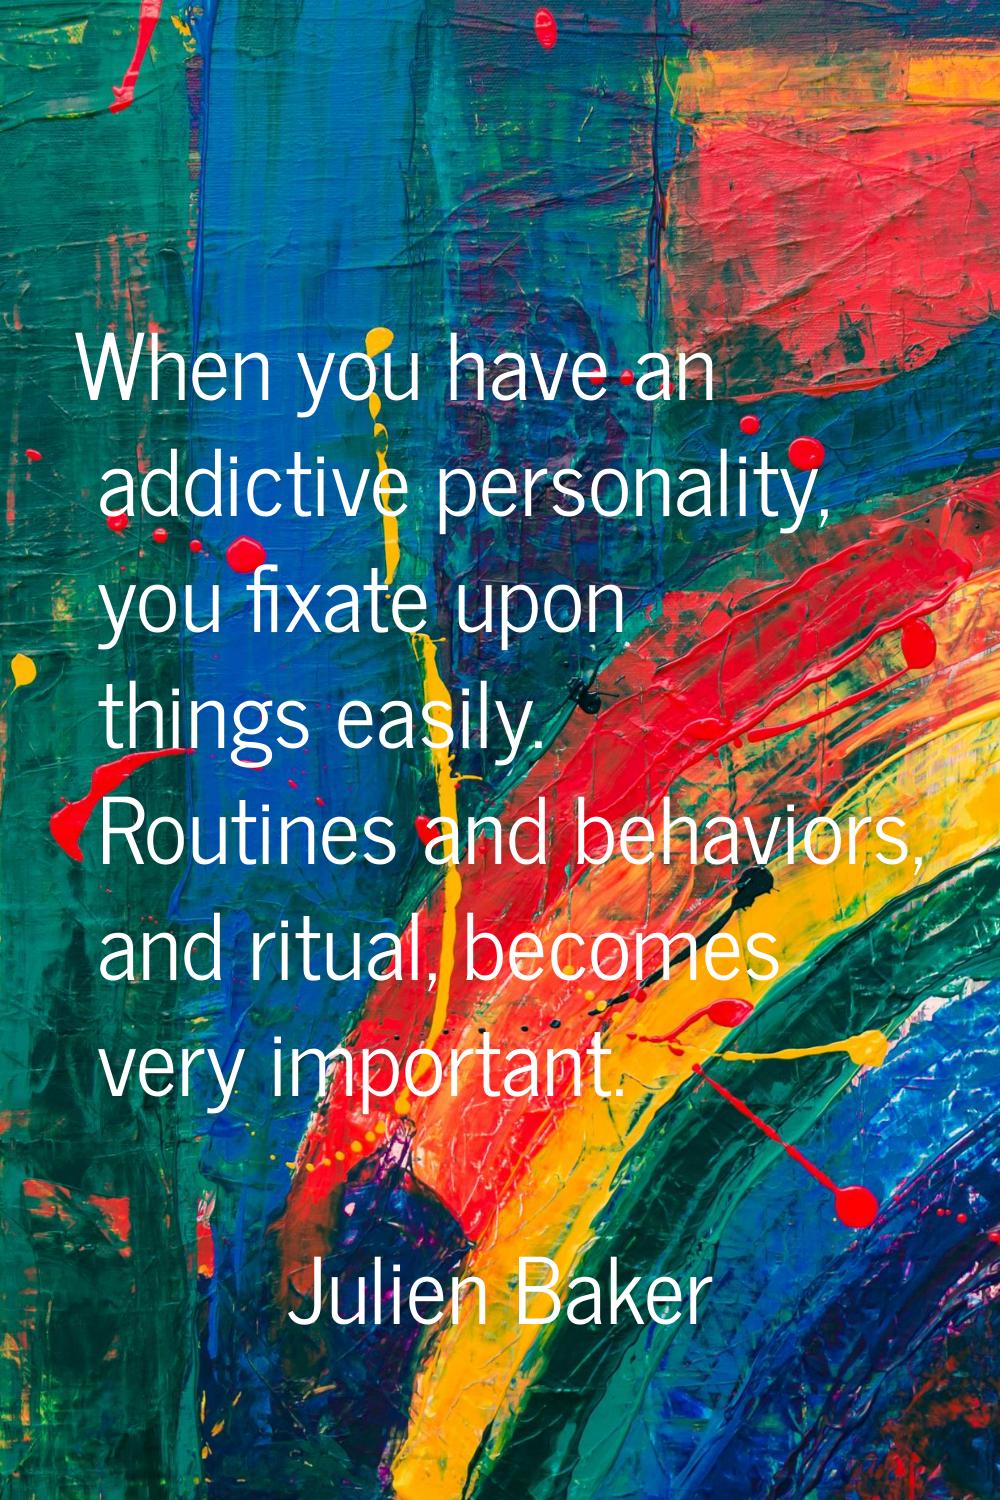 When you have an addictive personality, you fixate upon things easily. Routines and behaviors, and 